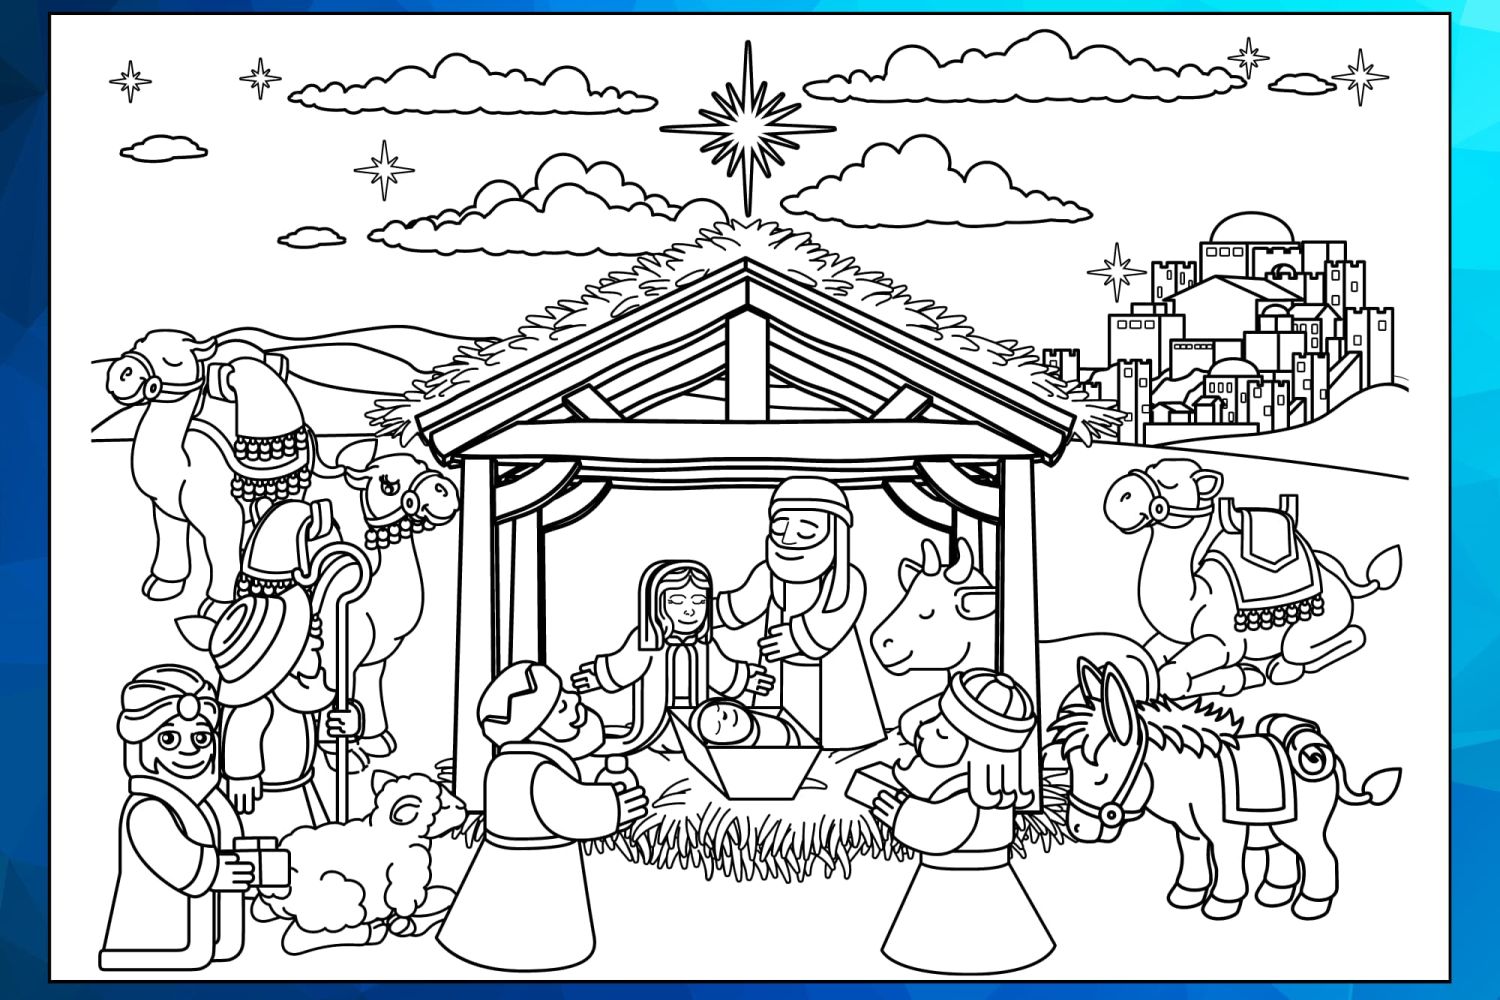 Nativity%20Scene%20Christmas%20Coloring%20Pages%20Worksheet%201-175b3fa4 Jesus - His birth